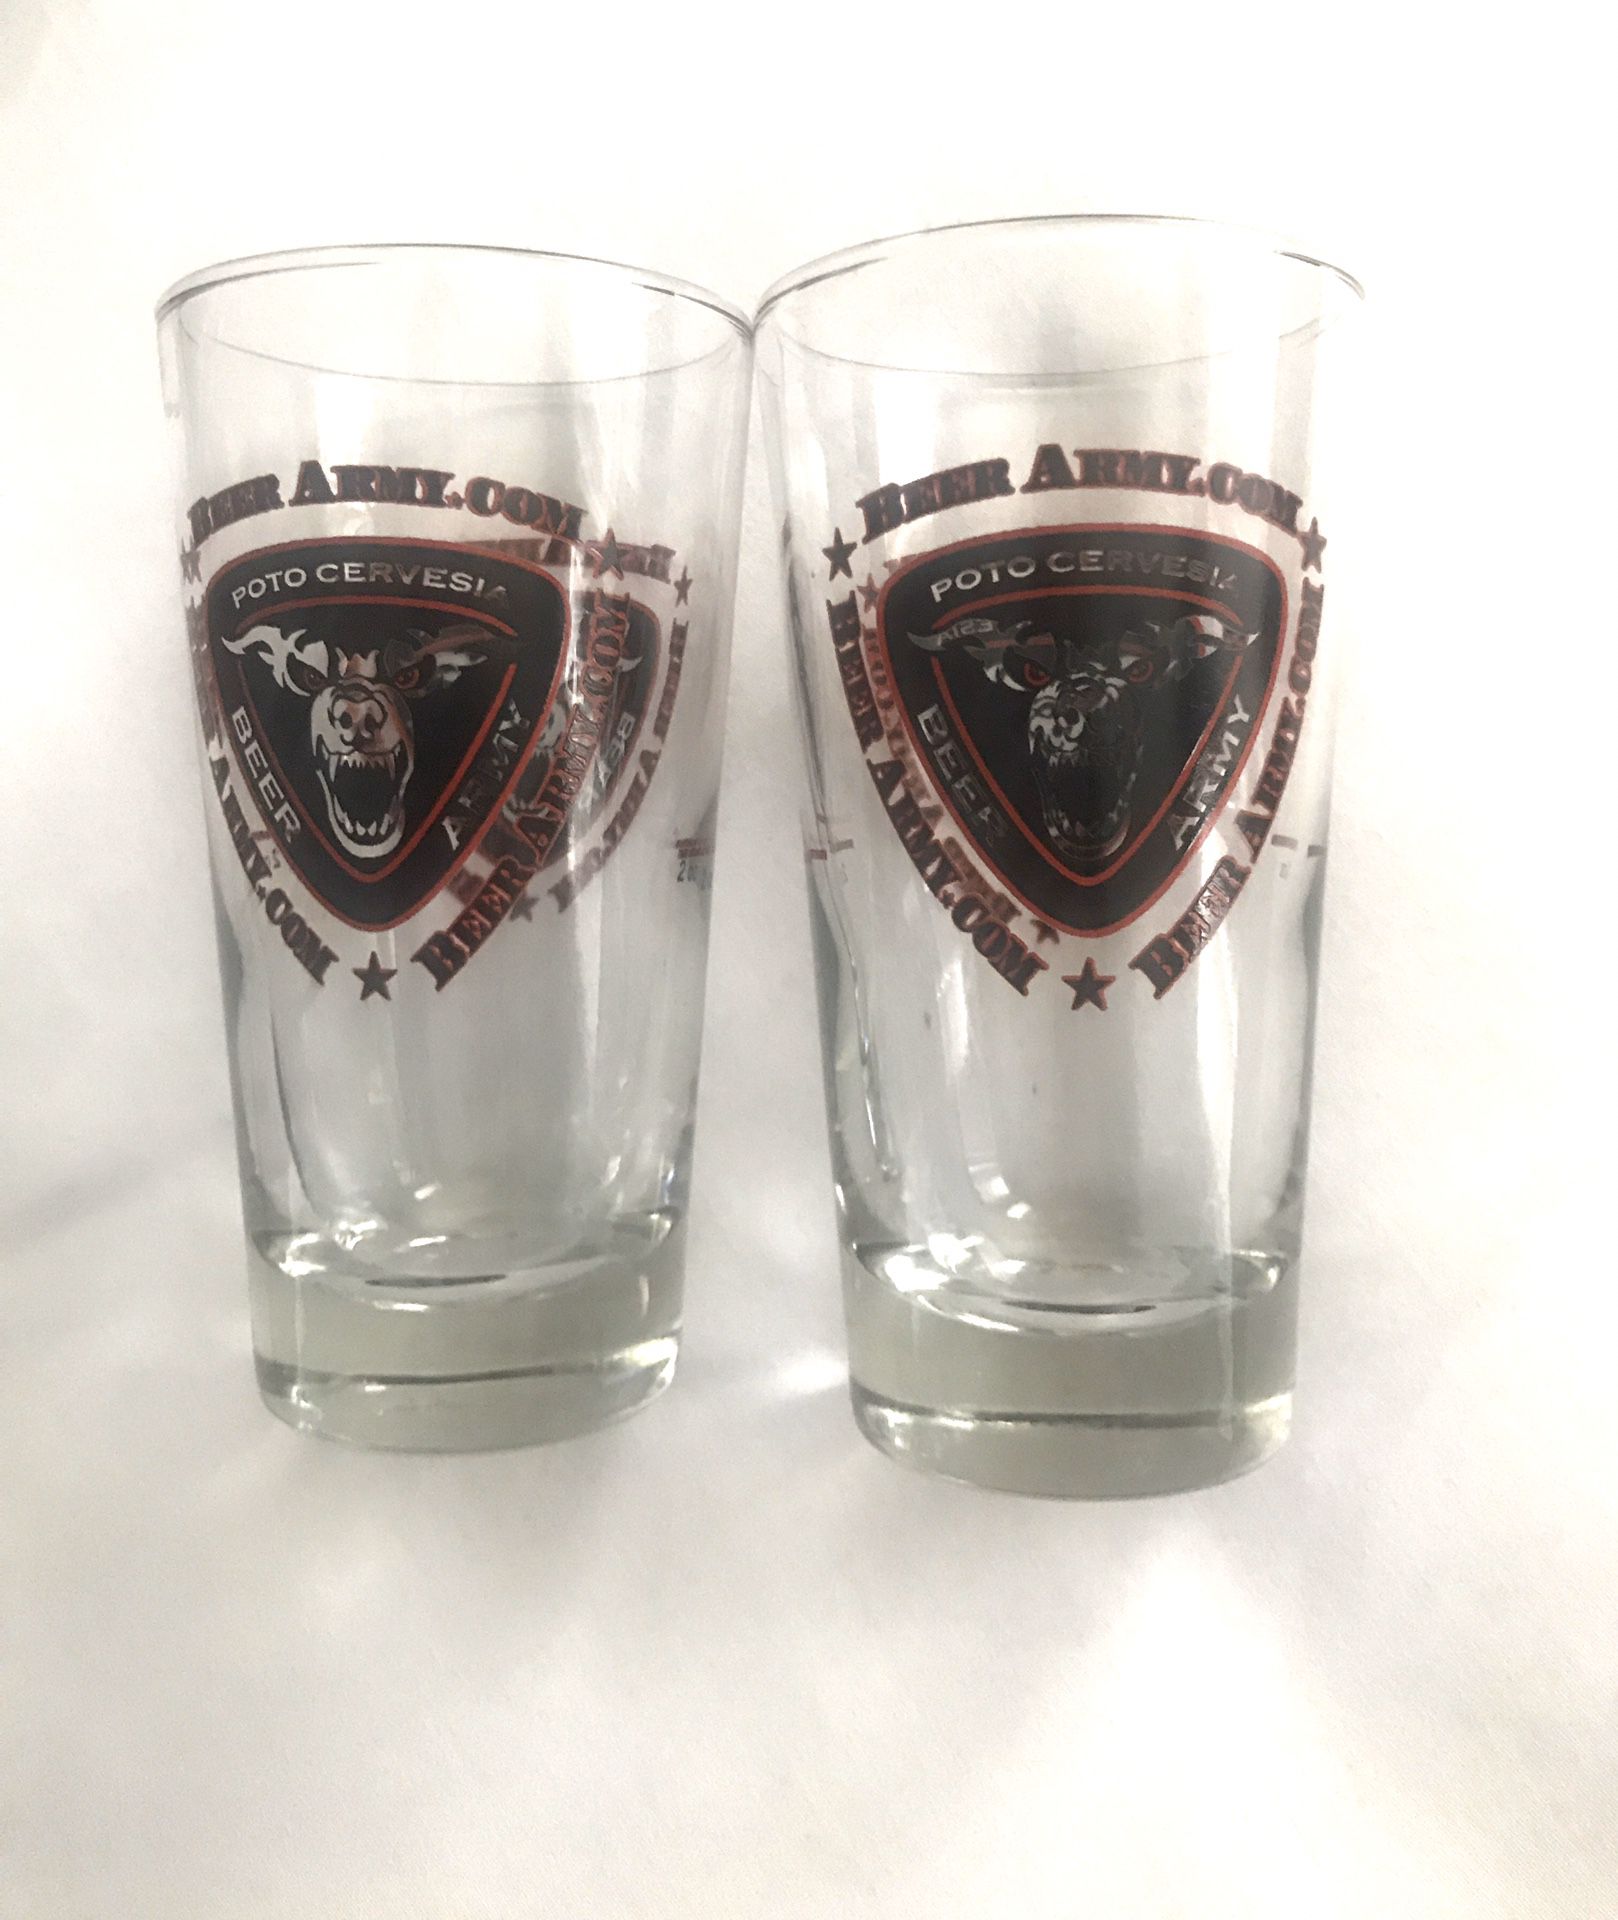 (Two) Beer Army. Big shoot glass/ Beer tasting glass